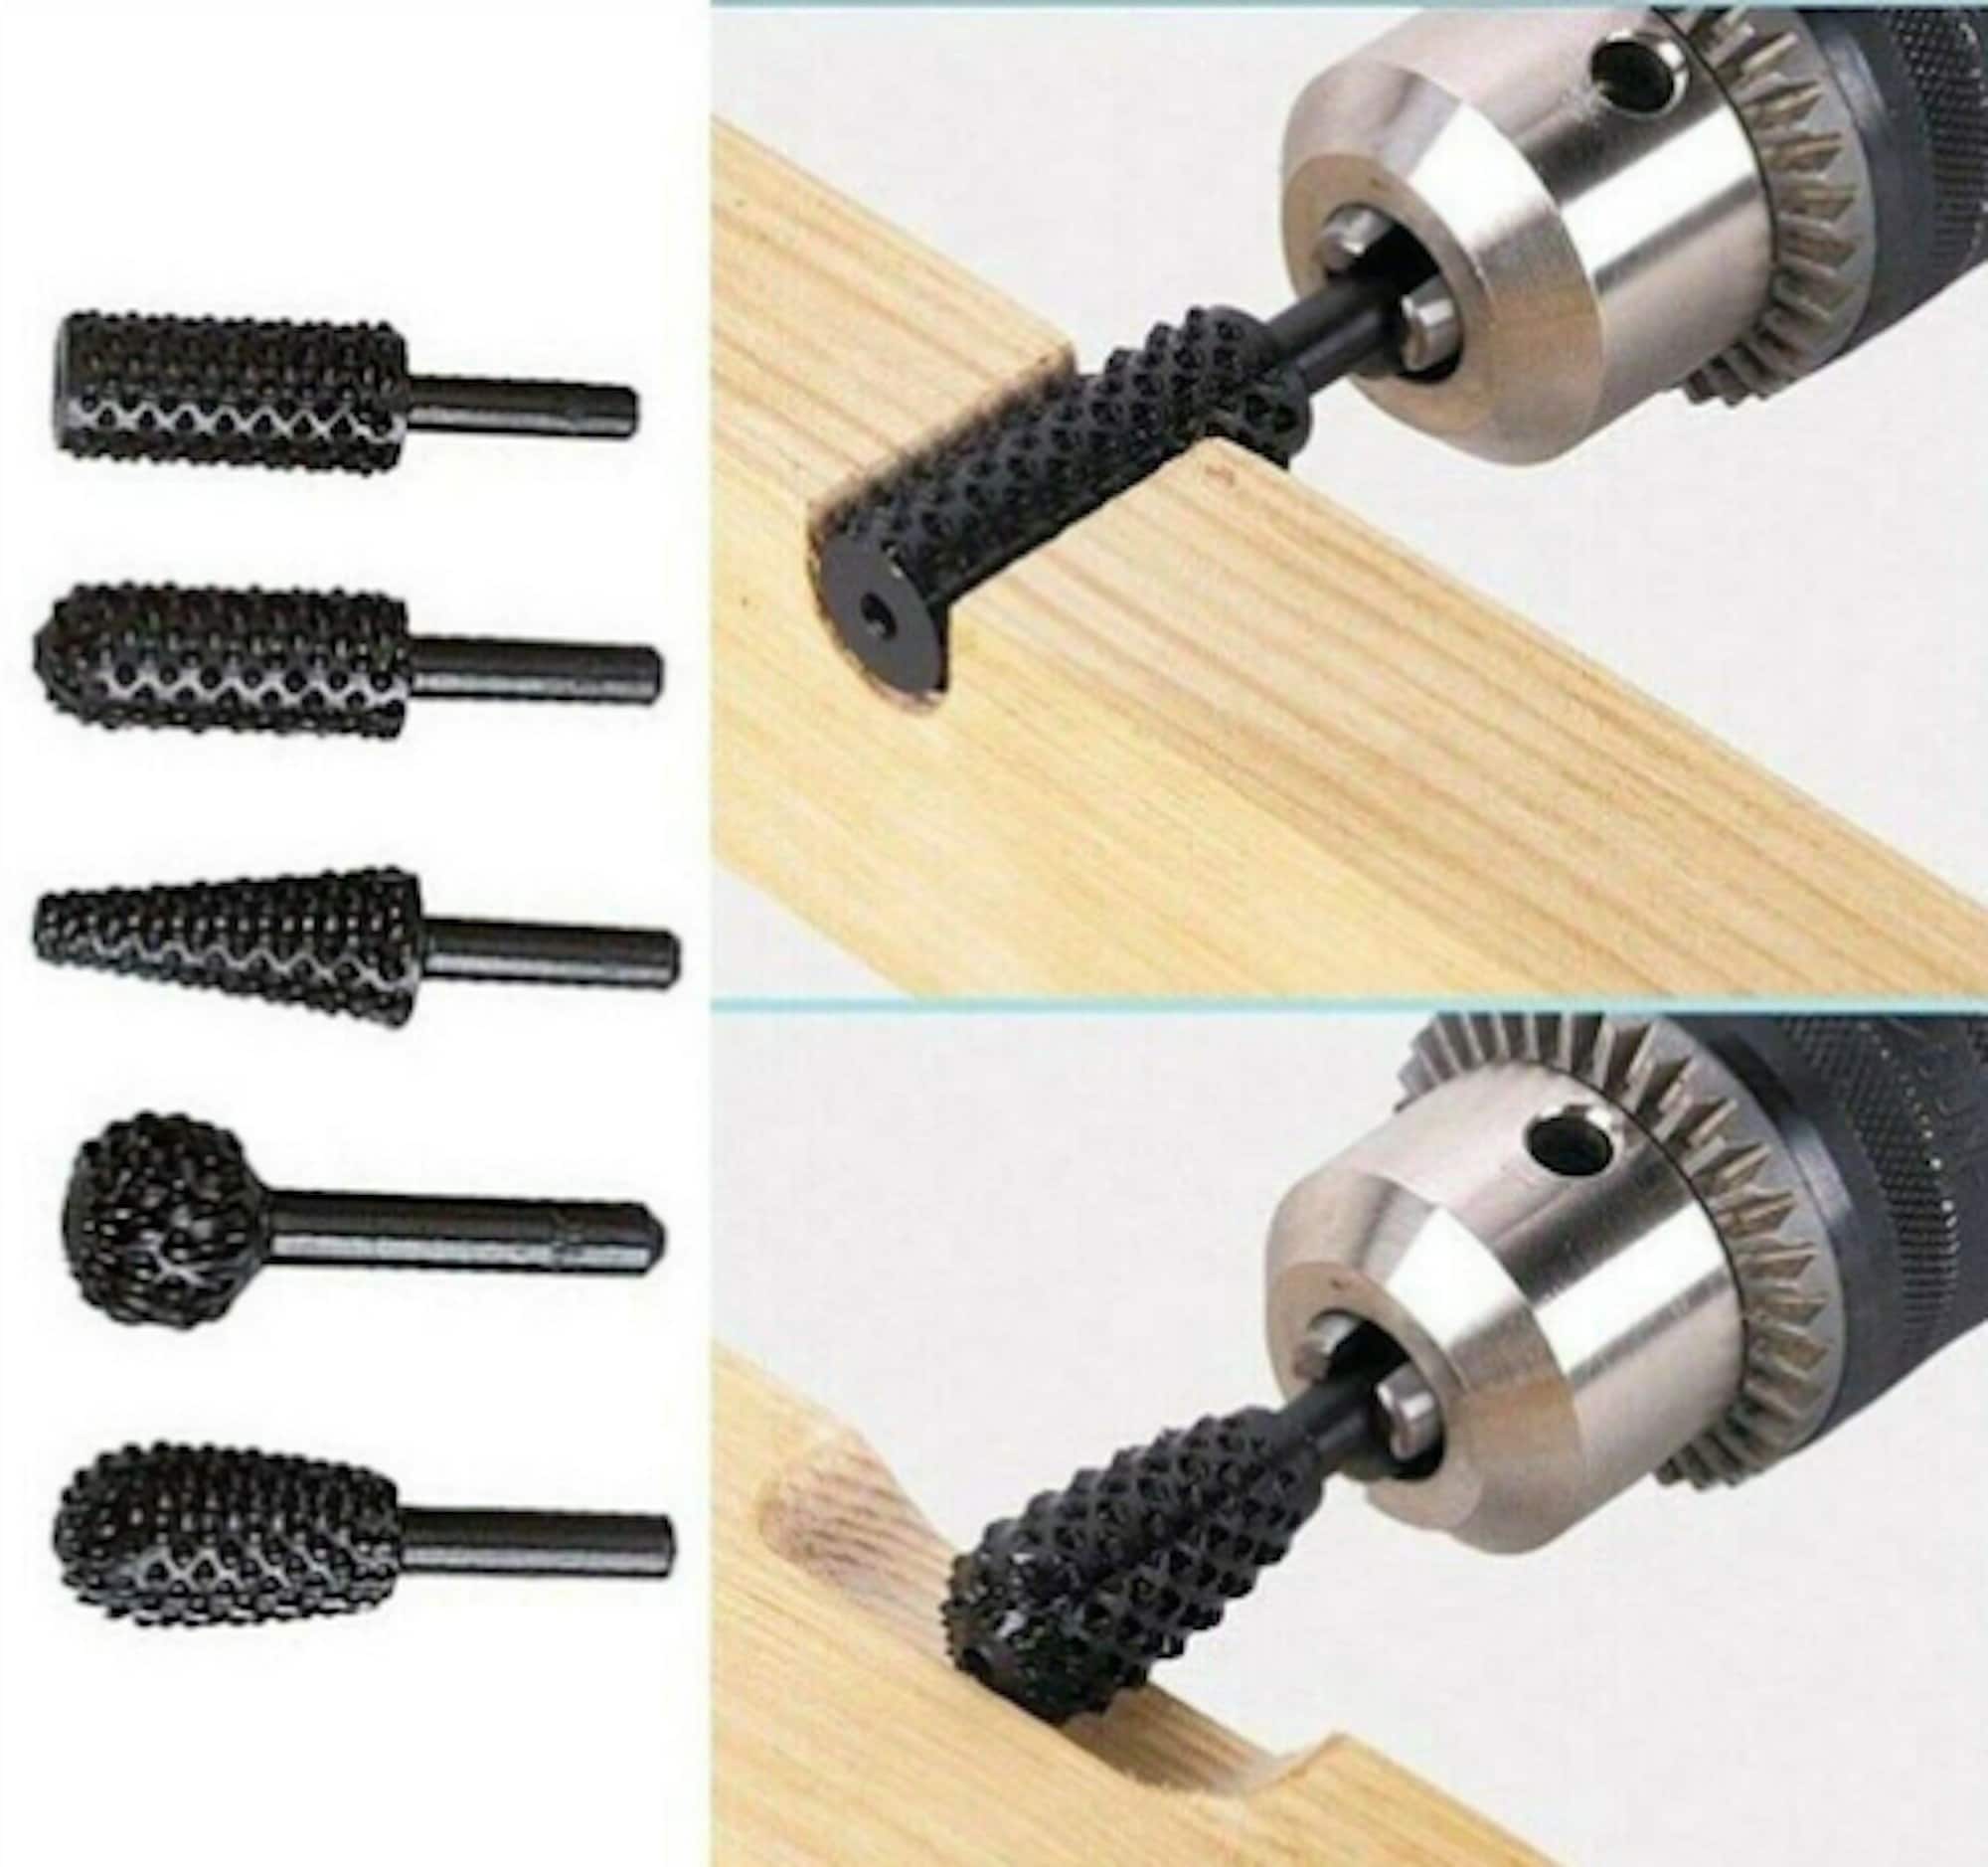 Planer Attachment for Dremel Style Power Tools, Carbide Cutter, Dremel  Planer, Plane Wood, Carving, Hobby, Chamfering 